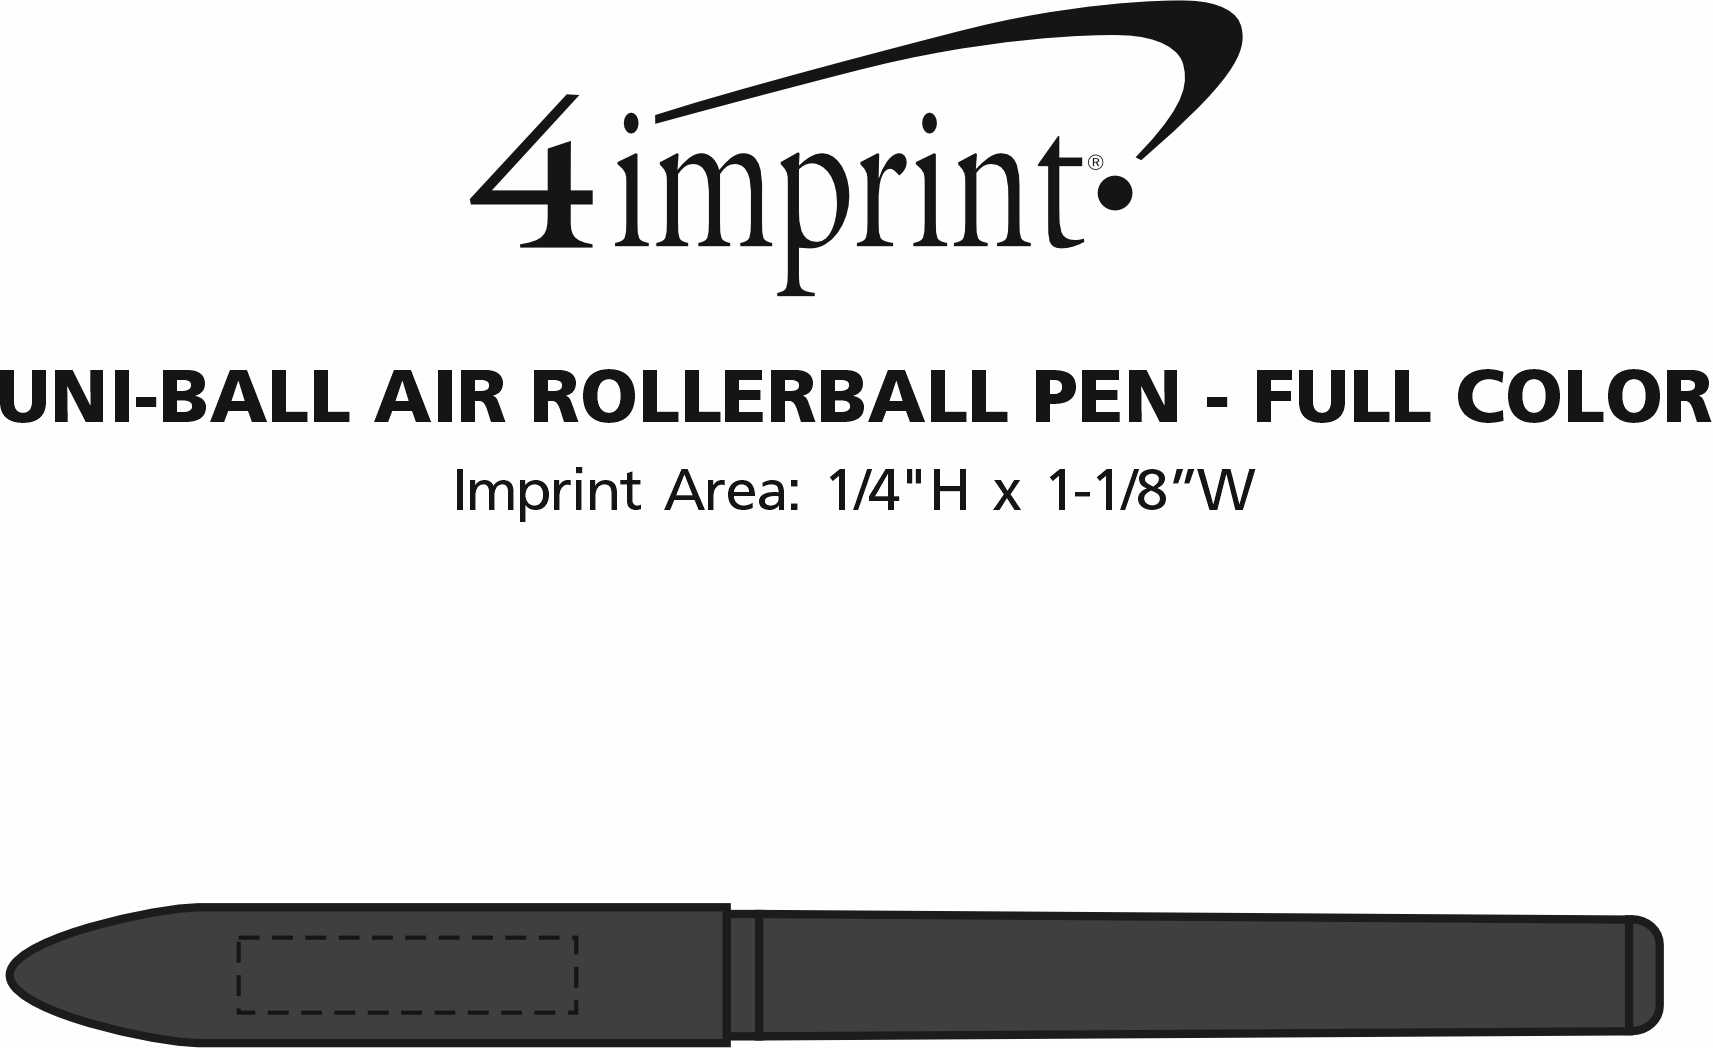 Imprint Area of uni-ball Air Rollerball Pen - Full Color